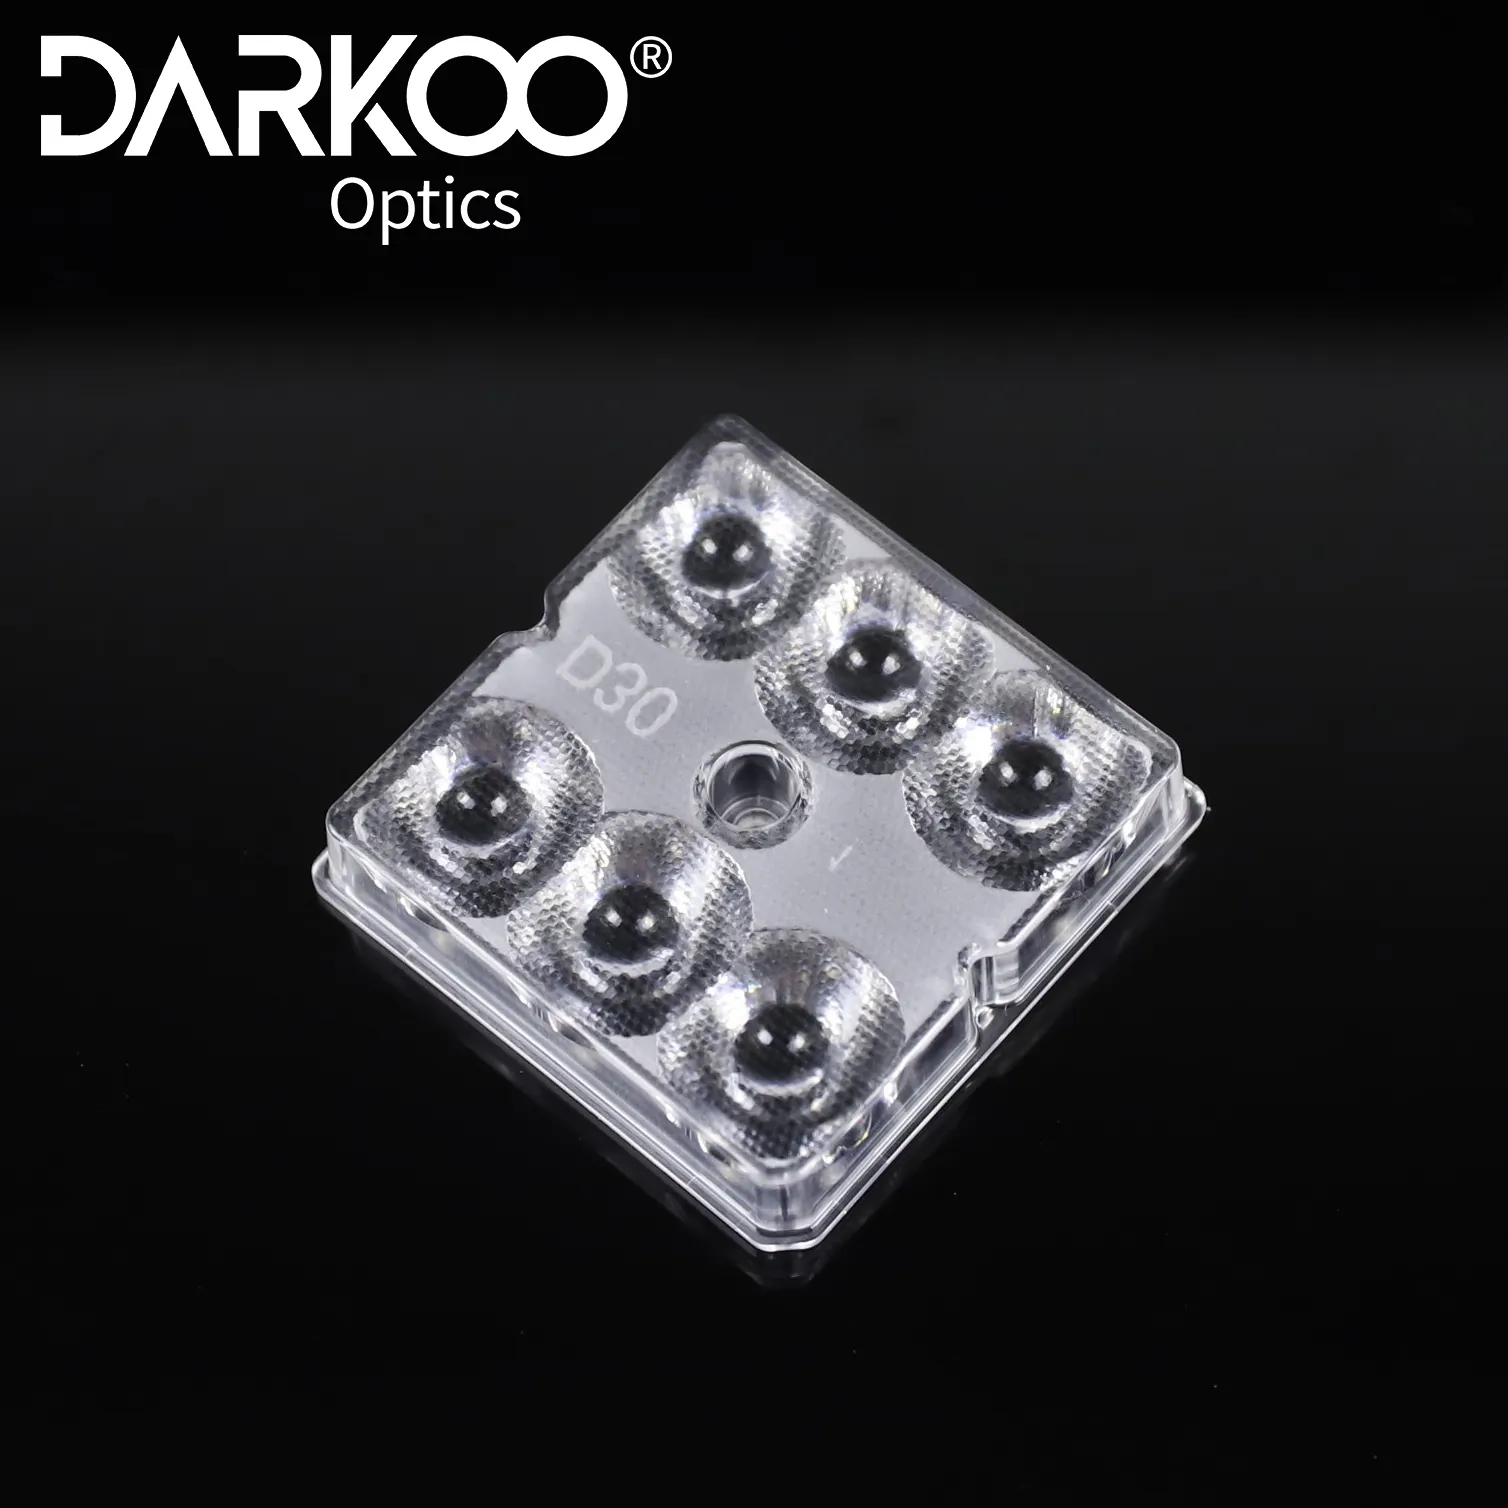 Darkoo Optical Lens Manufacturers Factory Price 1W 3W 160*80 Degree 6H1 High Power Led Optical Lenses With PMMA Or PC